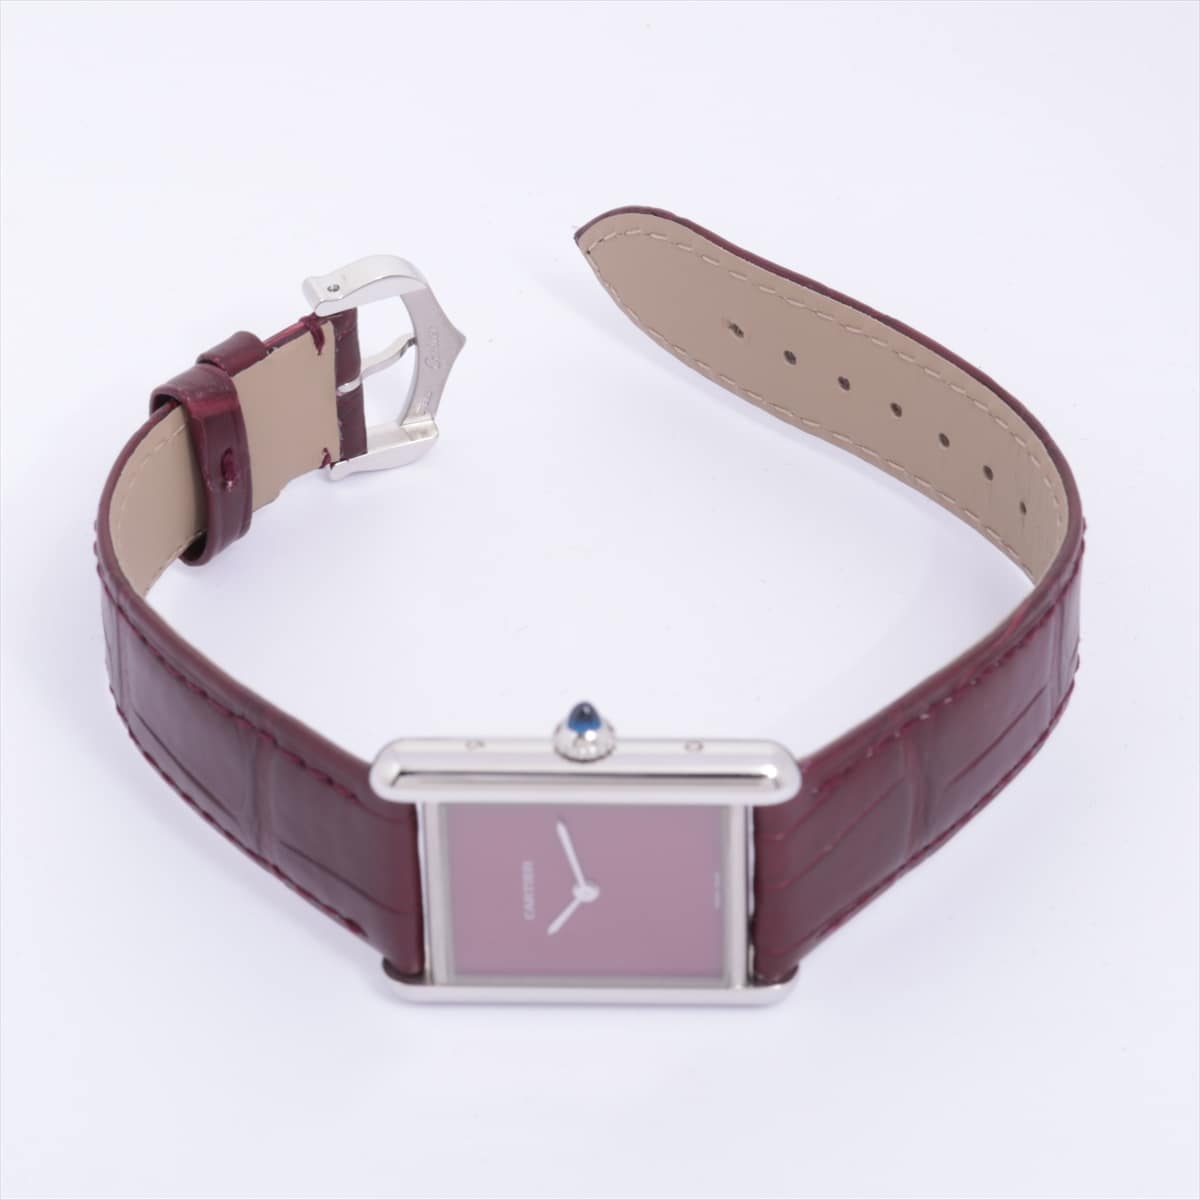 Cartier Tank mast WSTA0054 SS & leather QZ Red dial